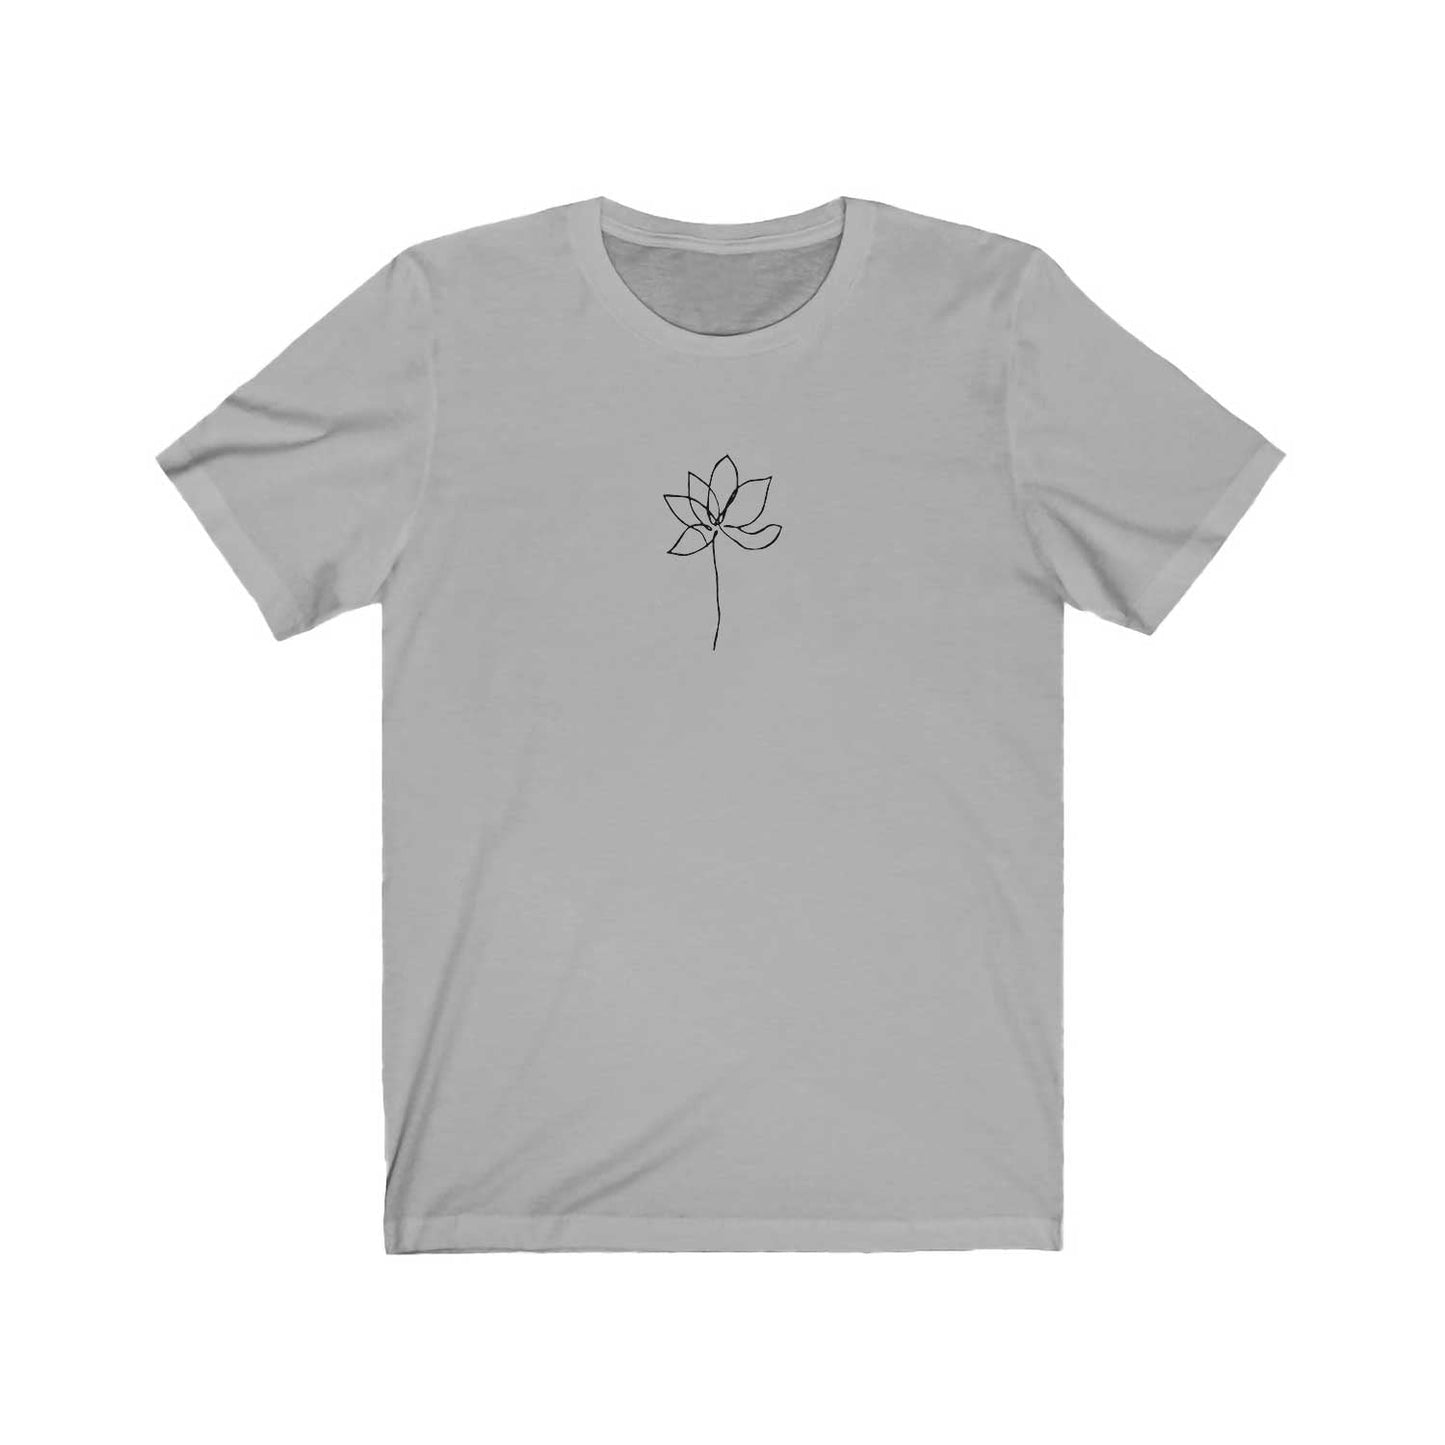 One Line Flower - Lily Tee